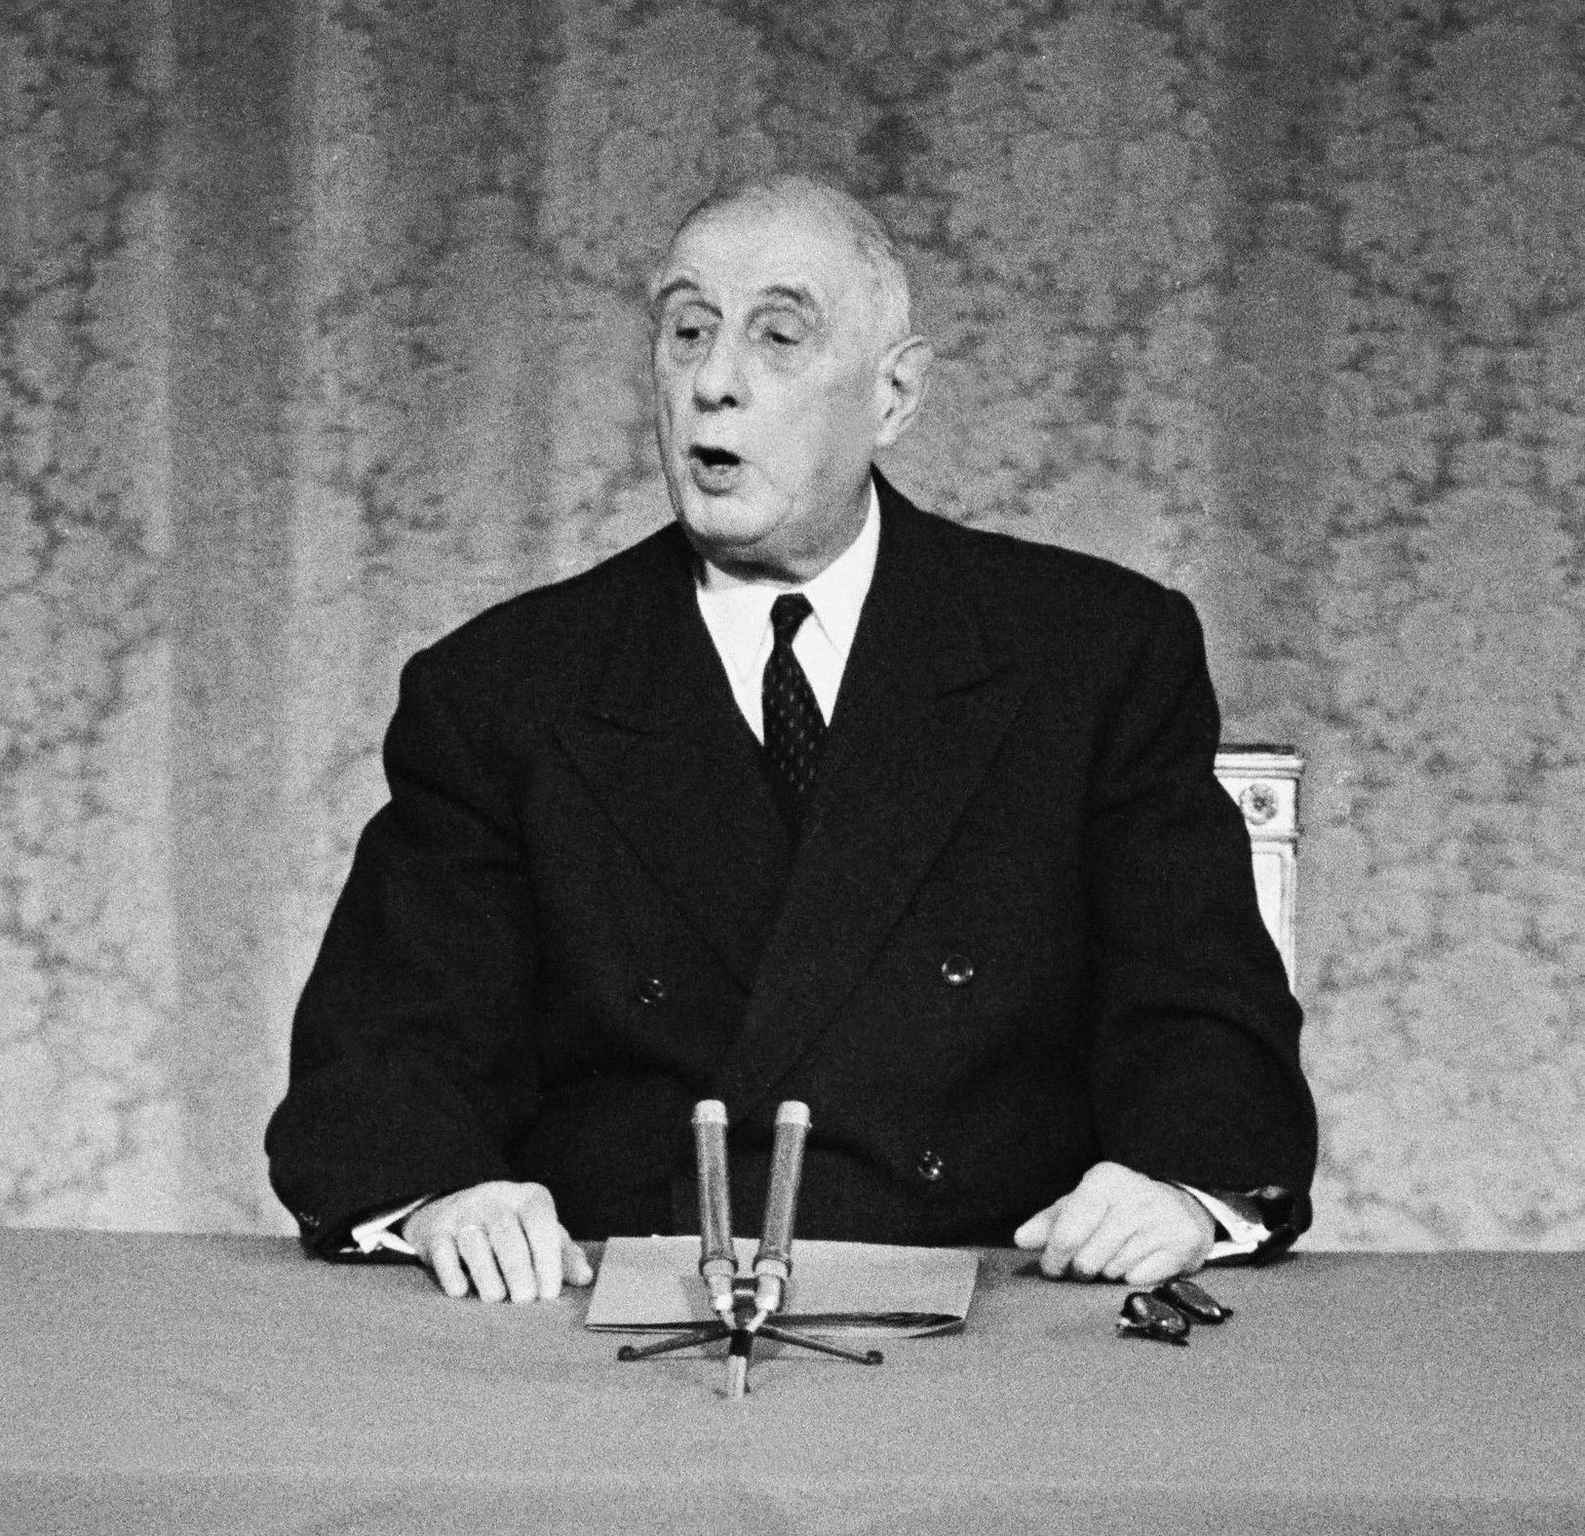 2048x1536-fit_president-charles-gaulle-lors-conference-presse-elysee-16-mai-1968